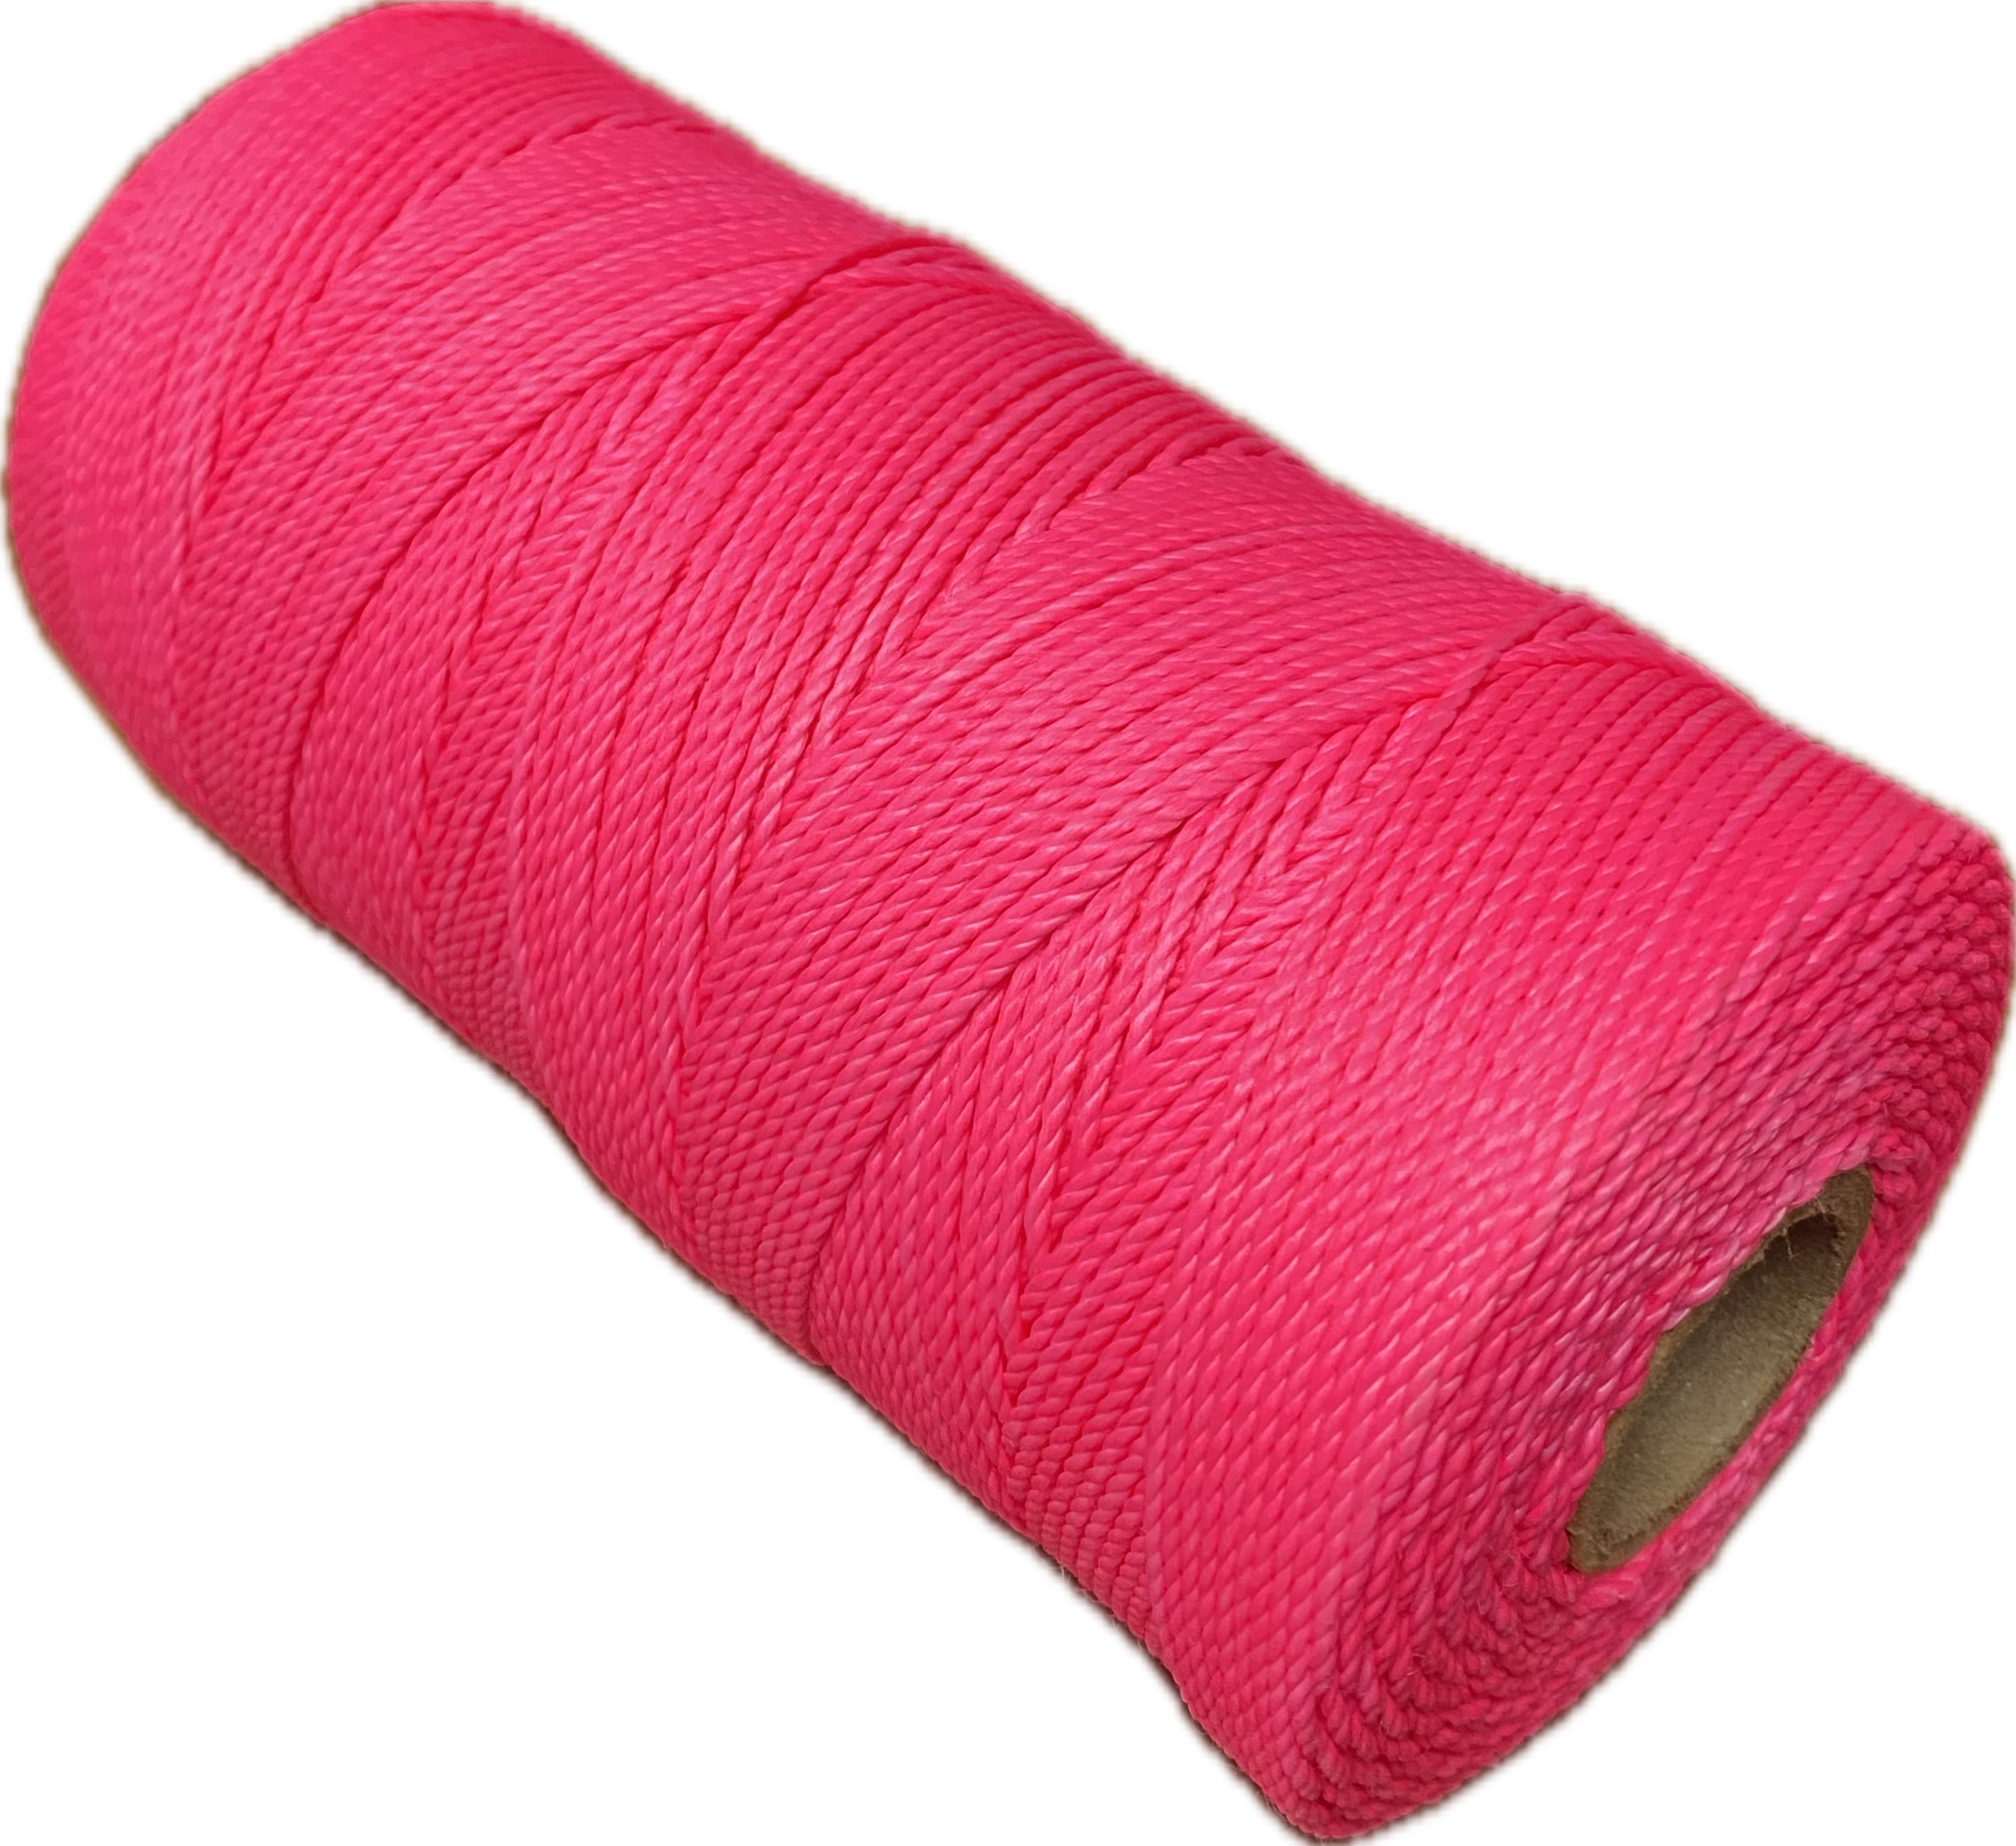 #18 x 1090ft Glo-Pink Twisted String Line - Utility and Pocket Knives